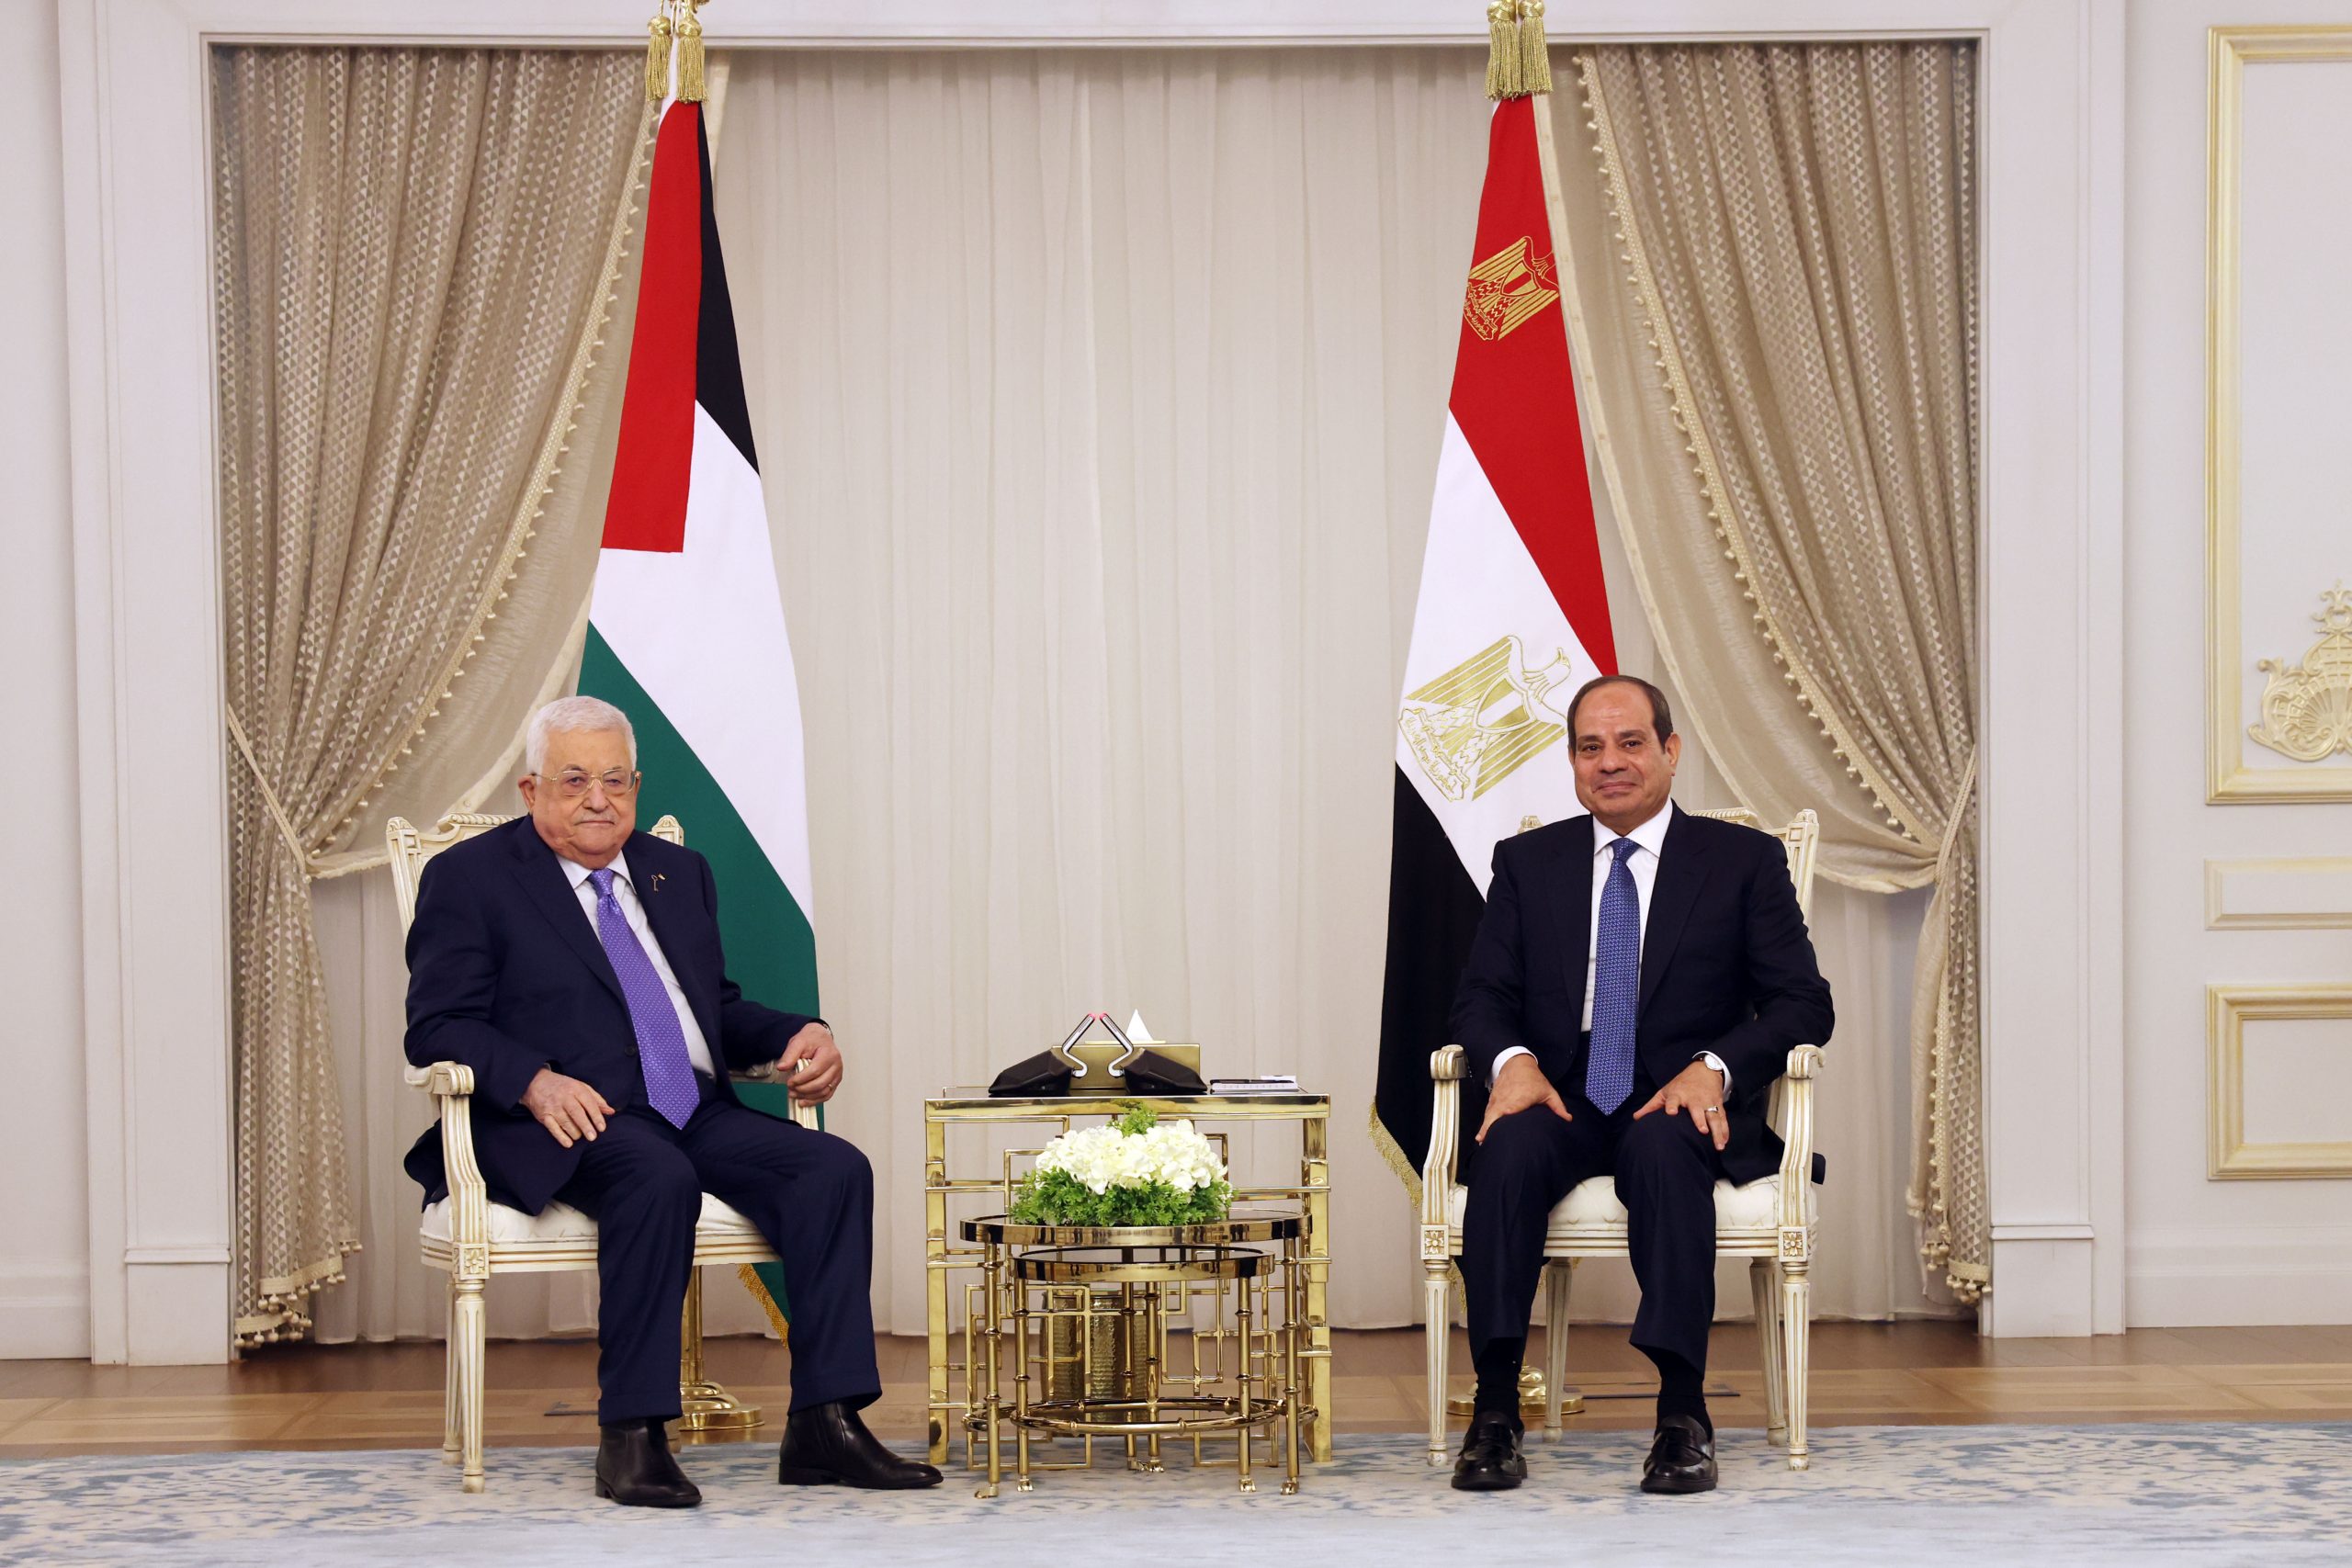 President Abbas meets El Sisi holding talks in Egyptian city of New El-Alamein